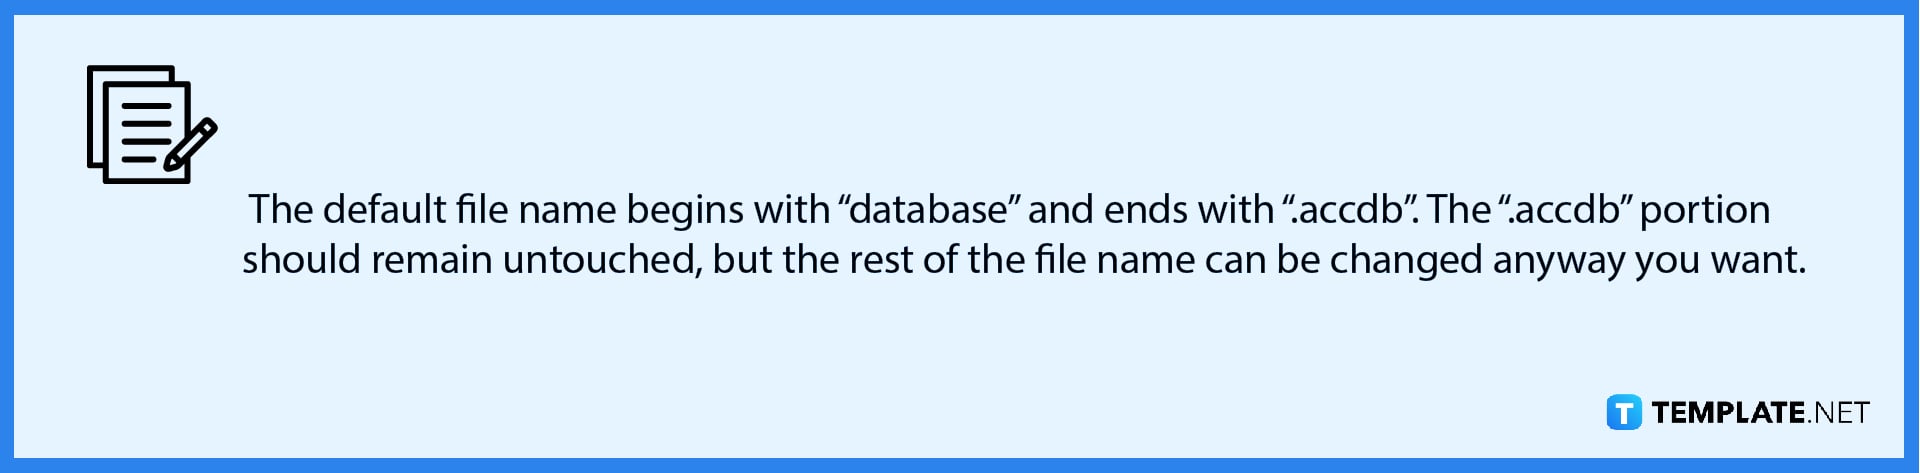 how-to-create-a-database-in-microsoft-access-note-1